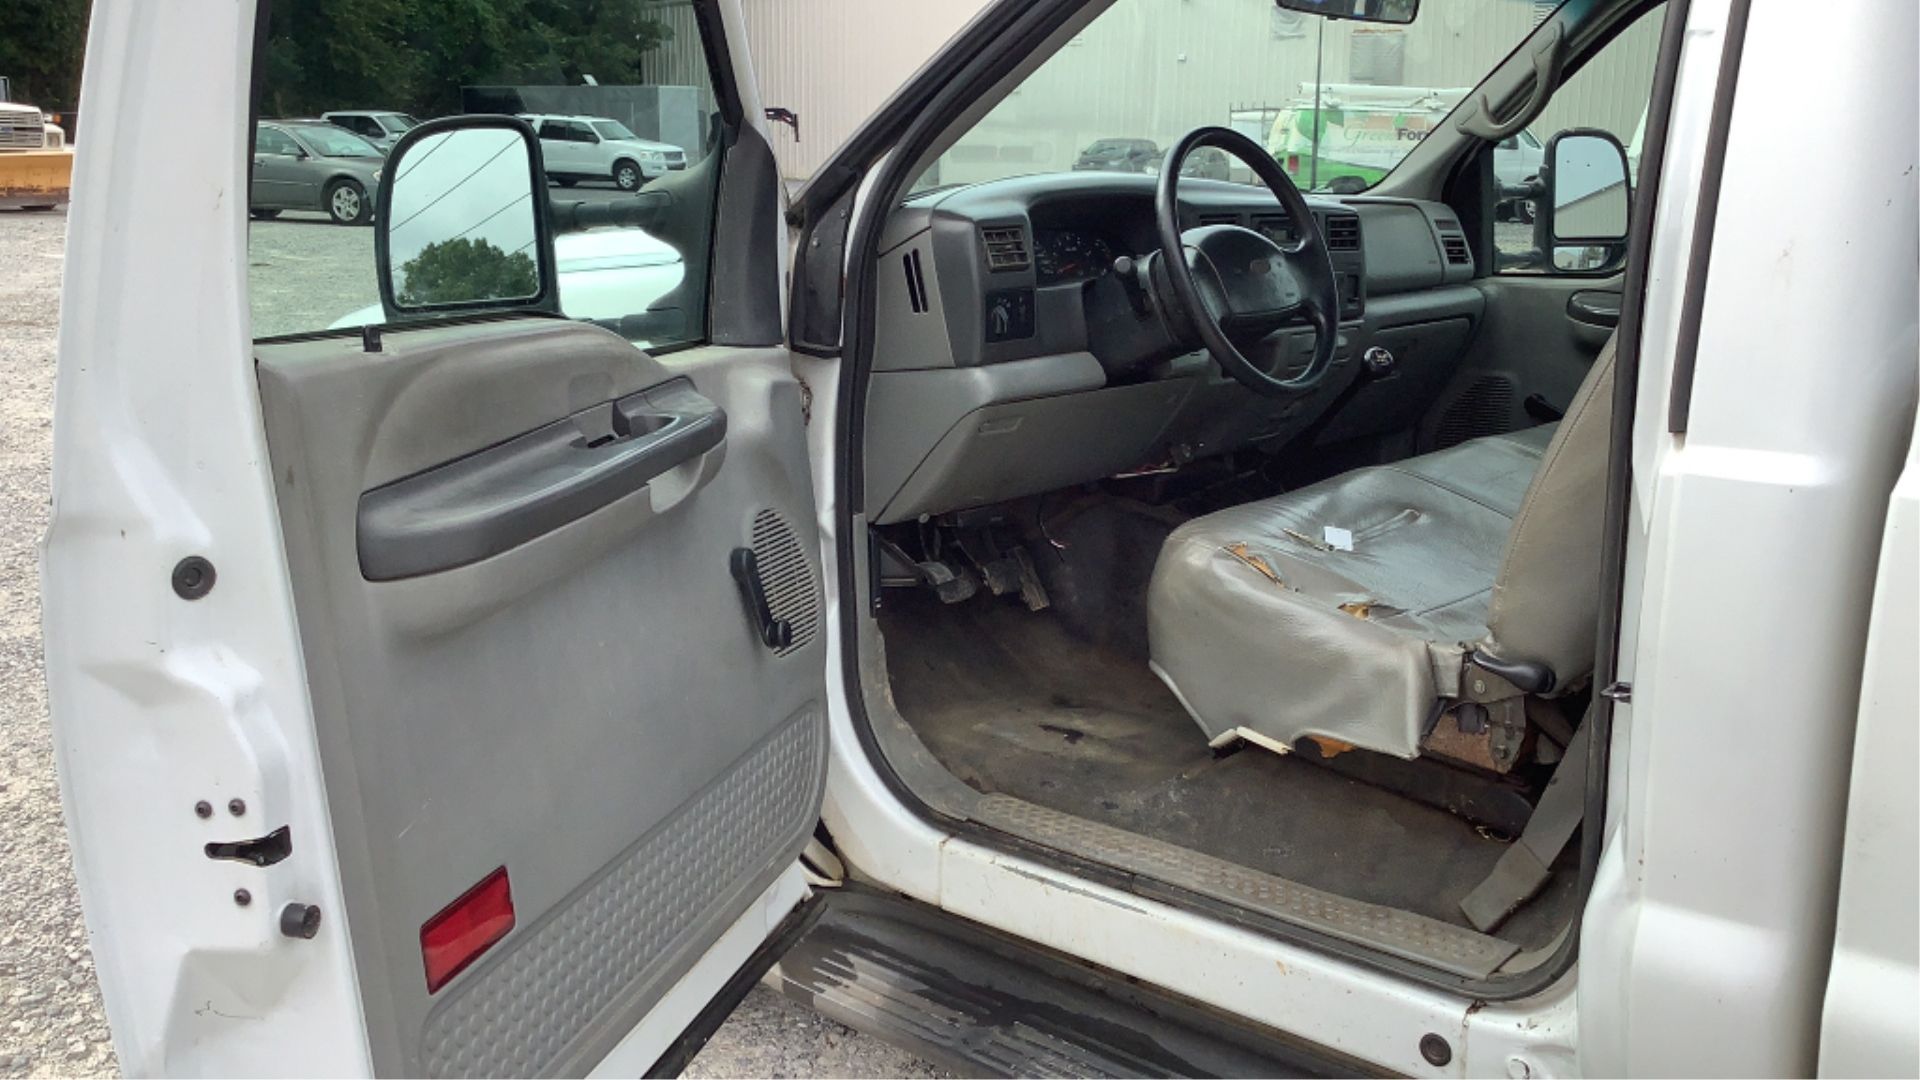 2002 Ford F-350 Regular Cab Dually 2WD - Image 48 of 89